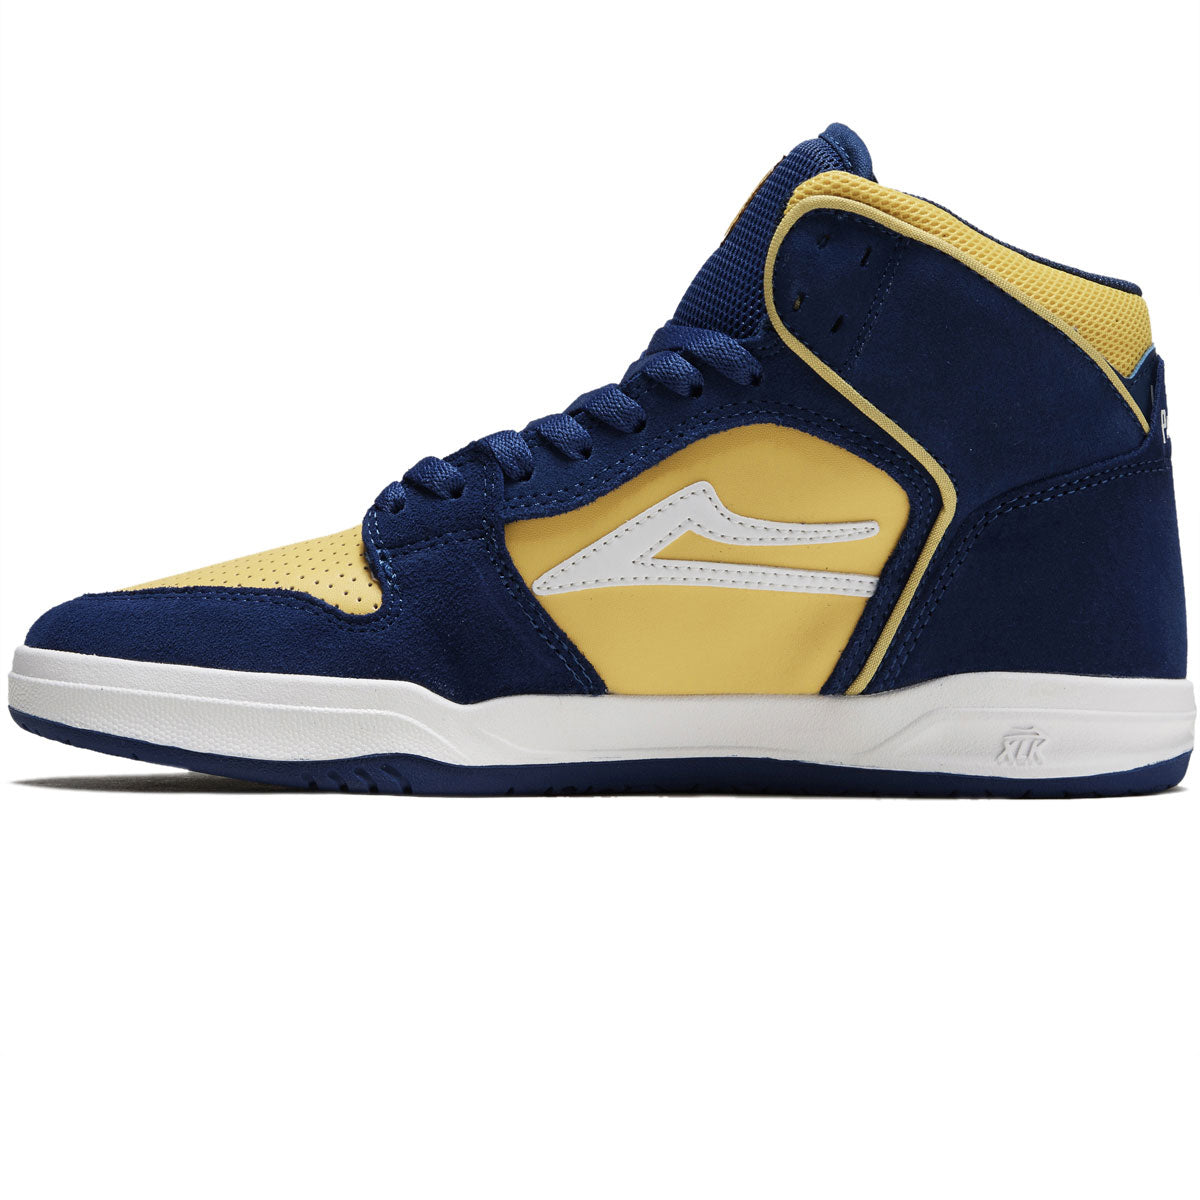 Lakai x Pacifico Telford Shoes - Blue/Yellow Suede image 2